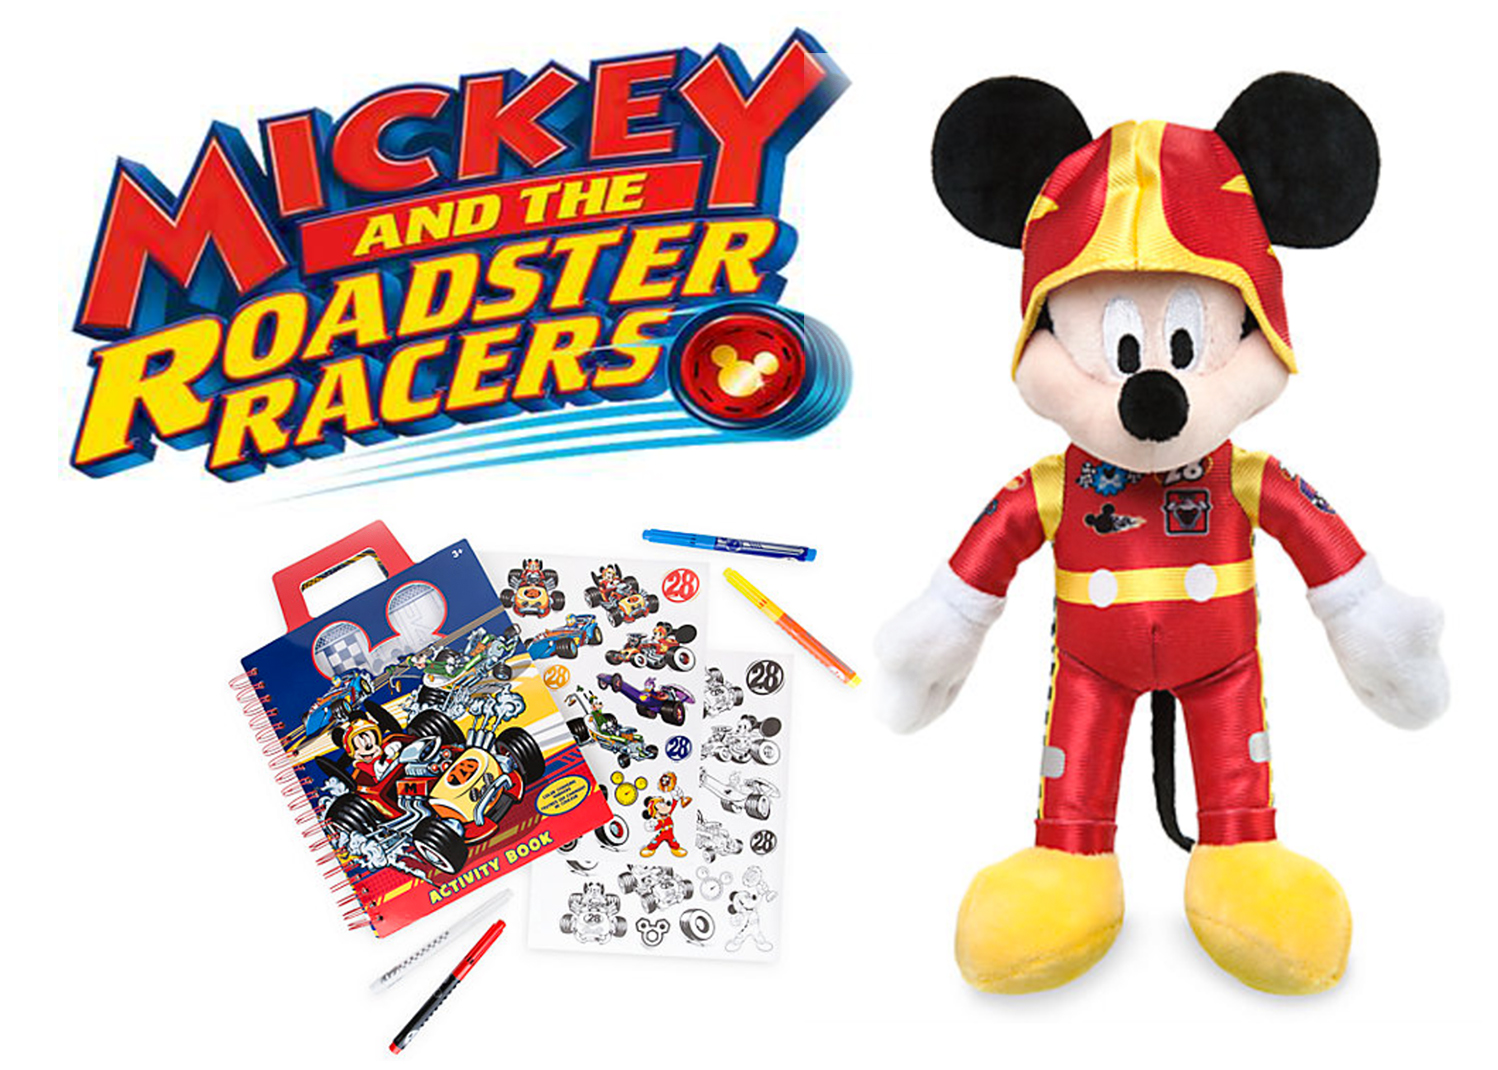 DISNEY’S MICKEY AND THE ROADSTER RACERS GIVEAWAY